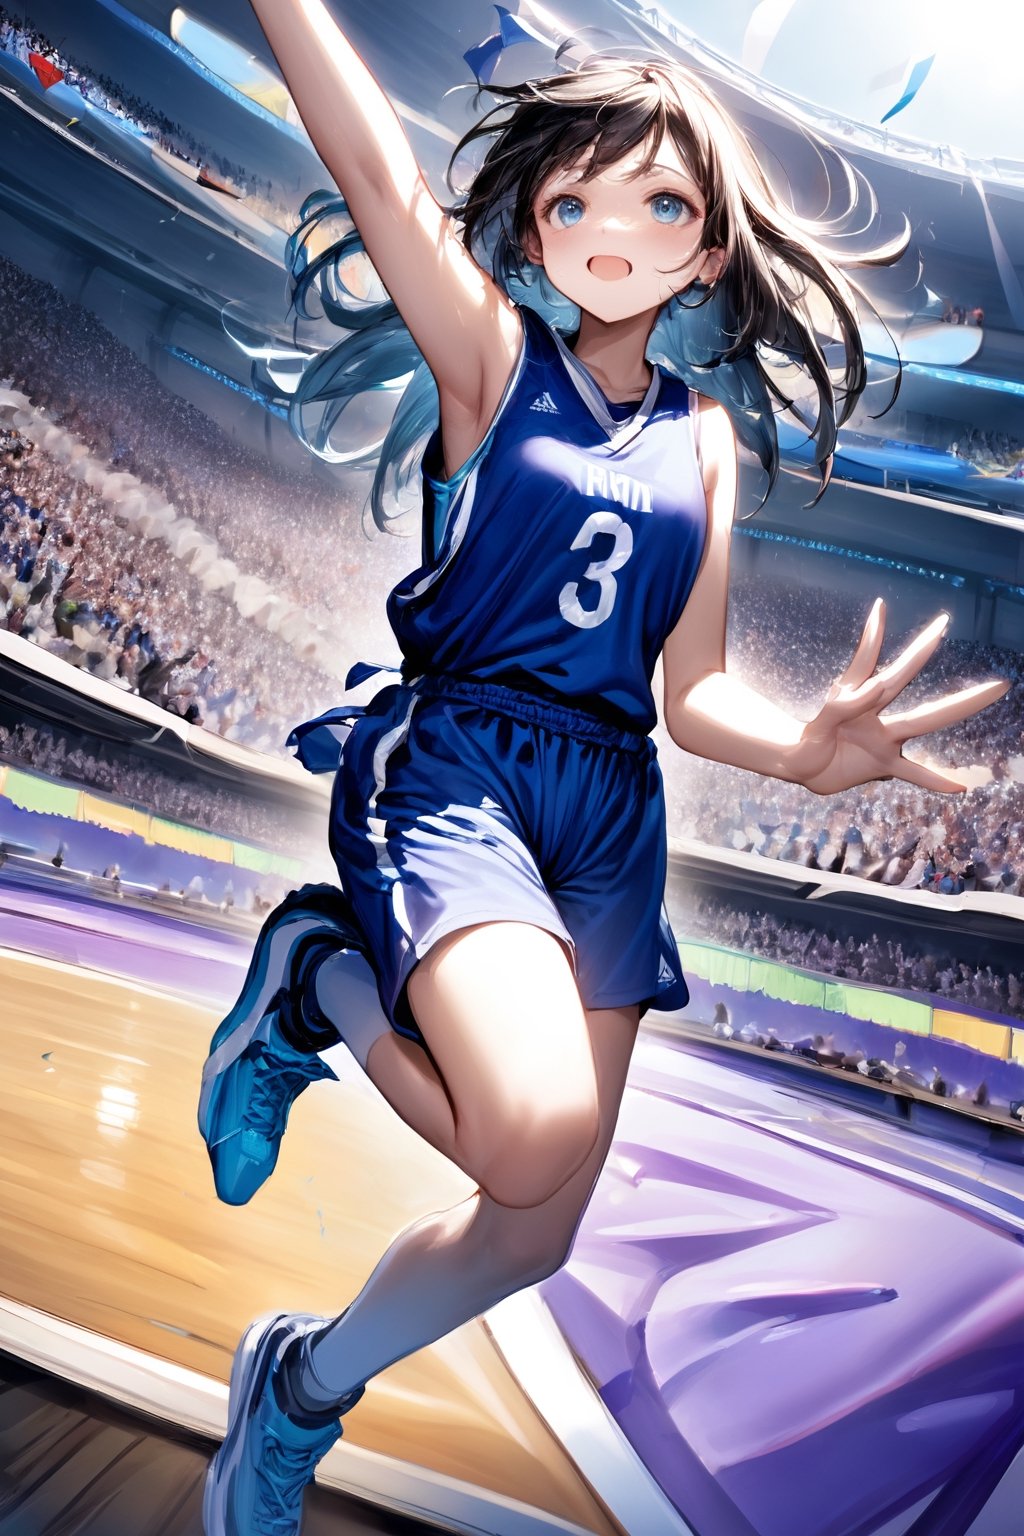 A captivating photo of a female basketball player at the peak of her jump, her arm extended toward the hoop with a focused expression. Her teammates cheer her on from the sidelines, while opponents watch with bated breath. The stadium is filled with a sea of cheering fans, waving banners and flags, creating an electrifying and energetic atmosphere.